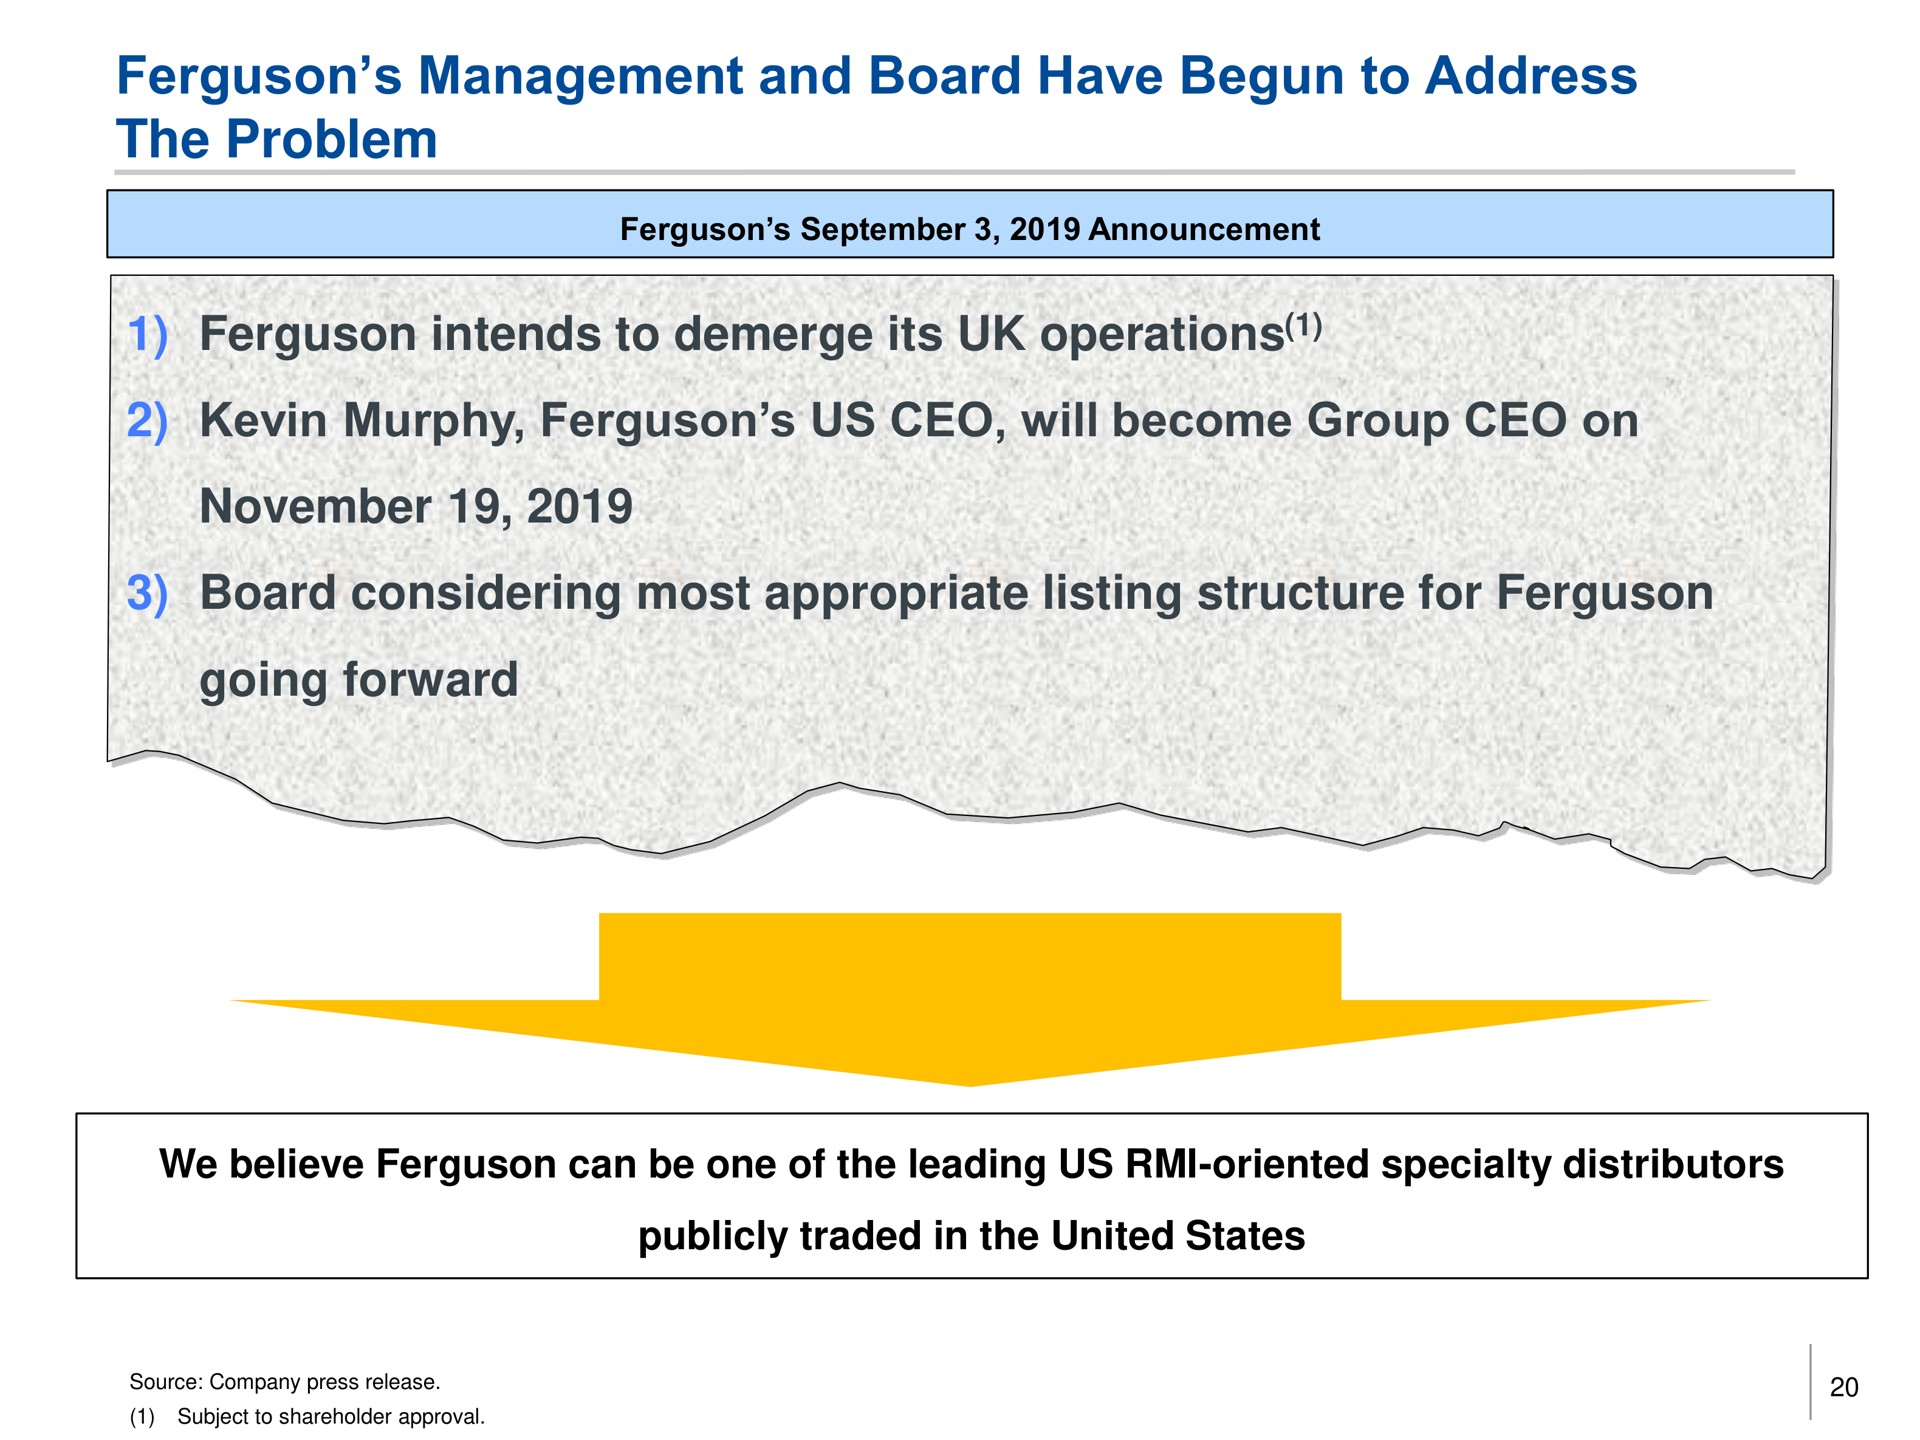 management and board have begun to address the problem intends to its operations murphy us will become group on board considering most appropriate listing structure for going forward | Trian Partners